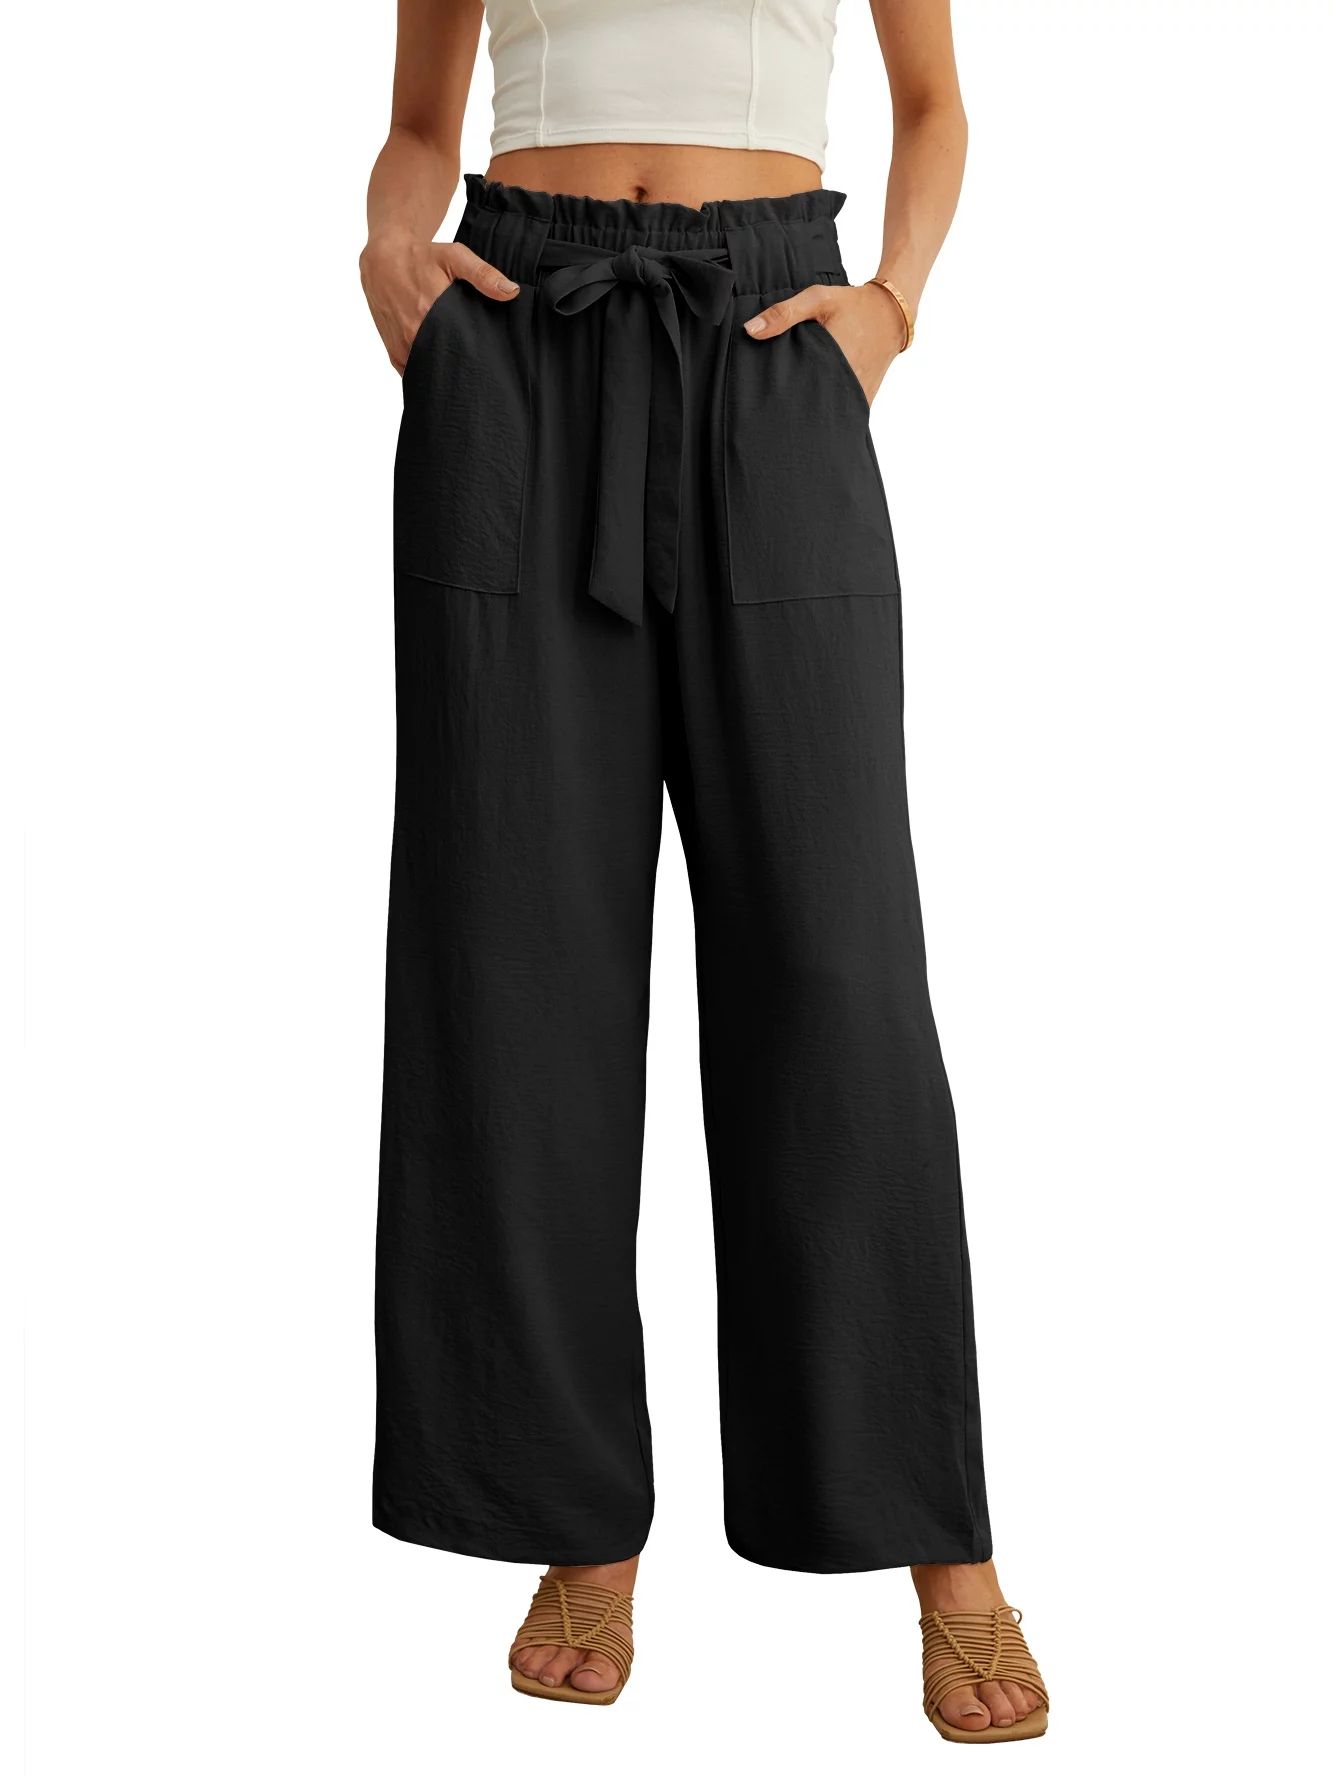 JWD Women's Wide Leg Pants With Pockets High Waist Adjustable Knot Loose Casual Trousers Business... | Walmart (US)